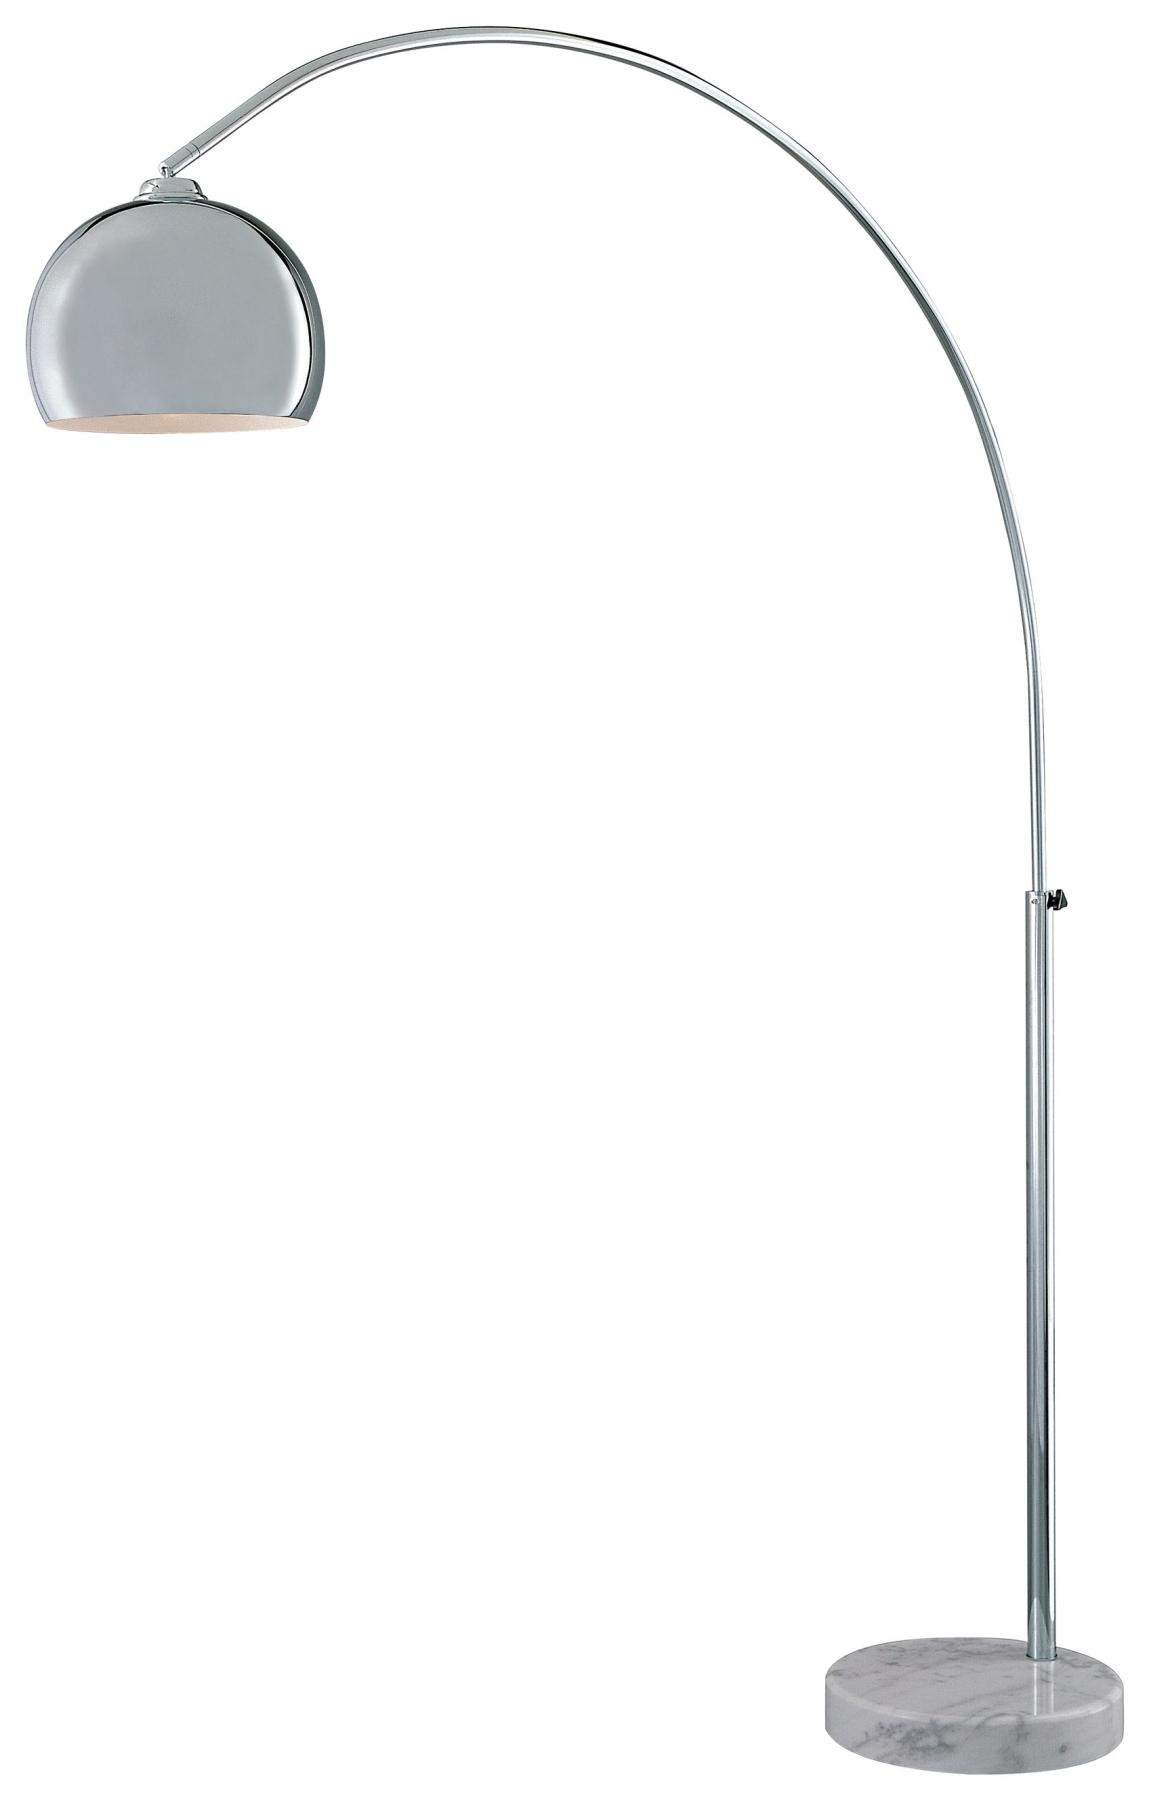 George Kovacs P053 077 Arc Floor Lamp In Chrome Withwhite pertaining to sizing 1150 X 1800